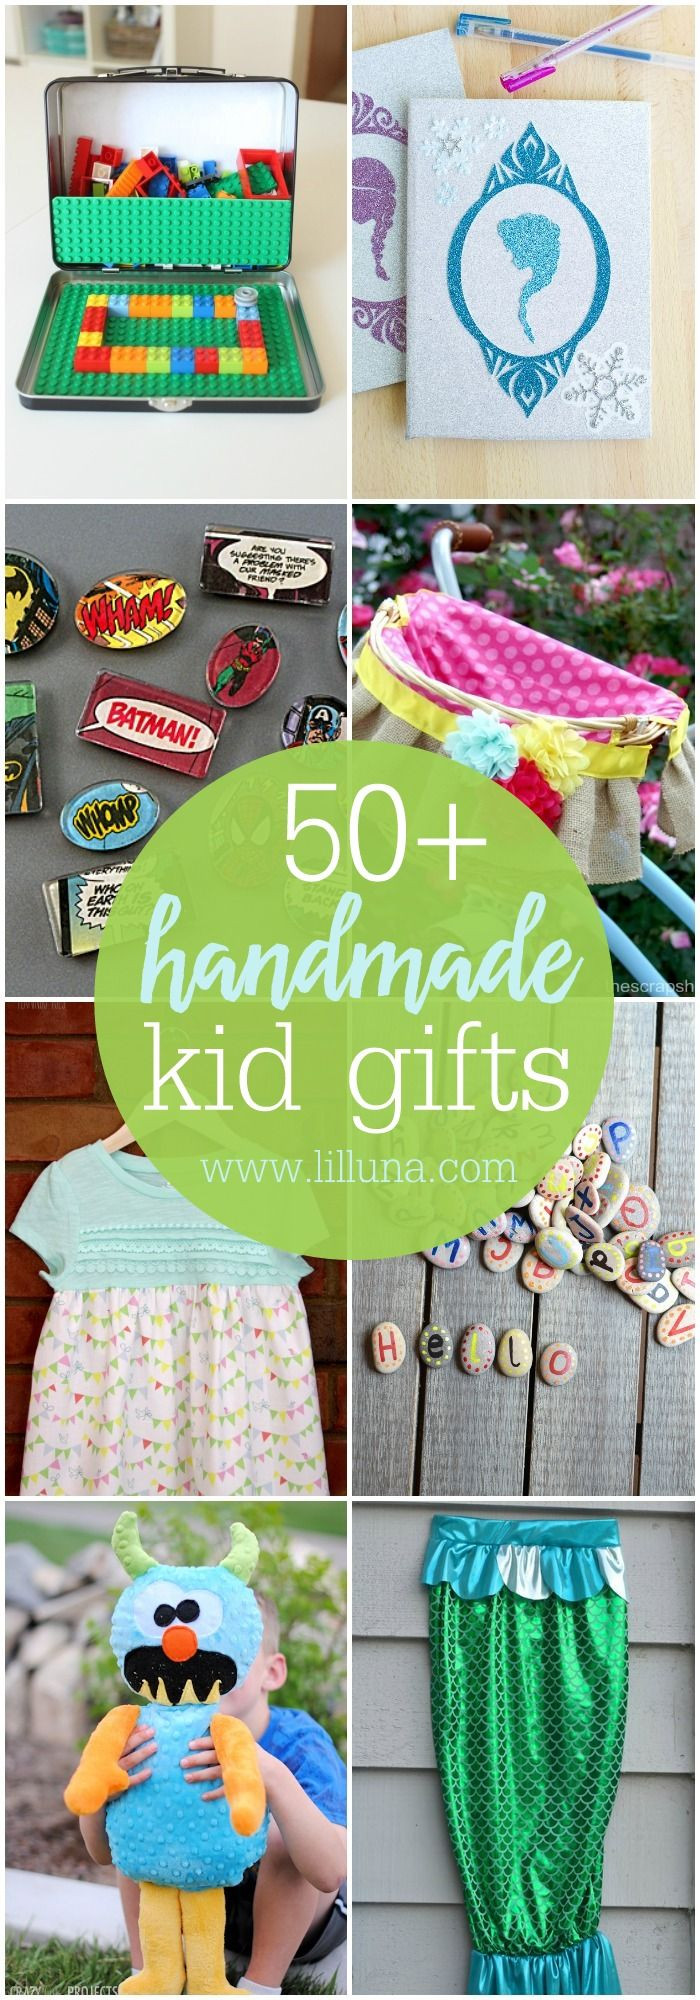 Creative Christmas Gifts For Kids
 50 Handmade Gift ideas for Kids so many great ideas to